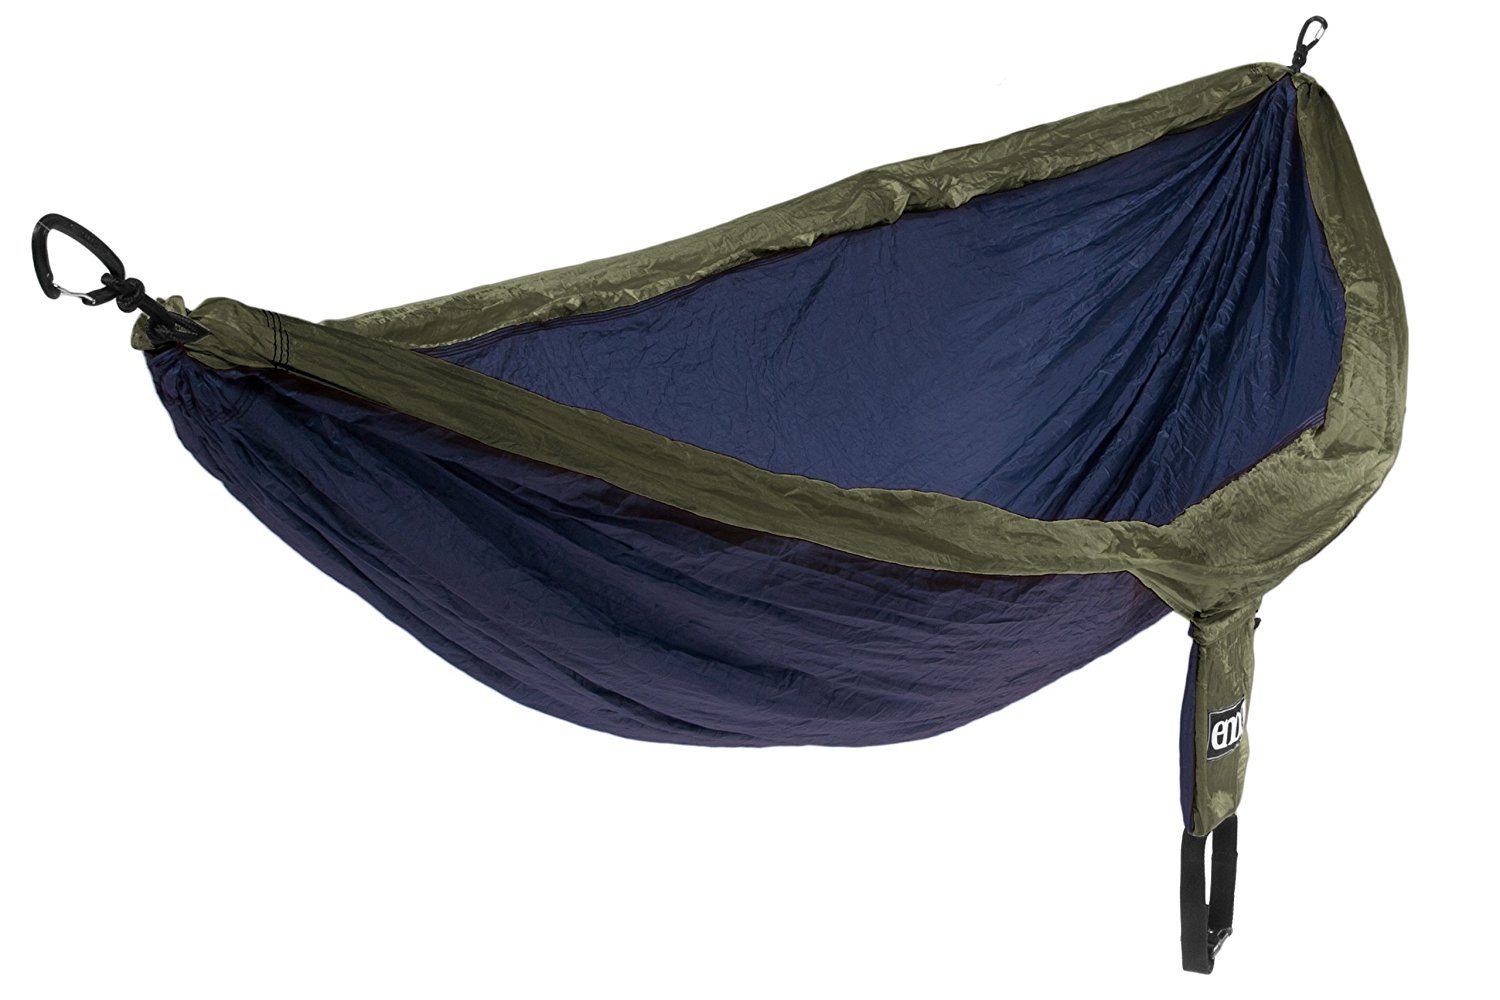 Eagles Nest Outfitters - DoubleNest Camping Hammock | 8 of the Best Camping Hammocks of 2017